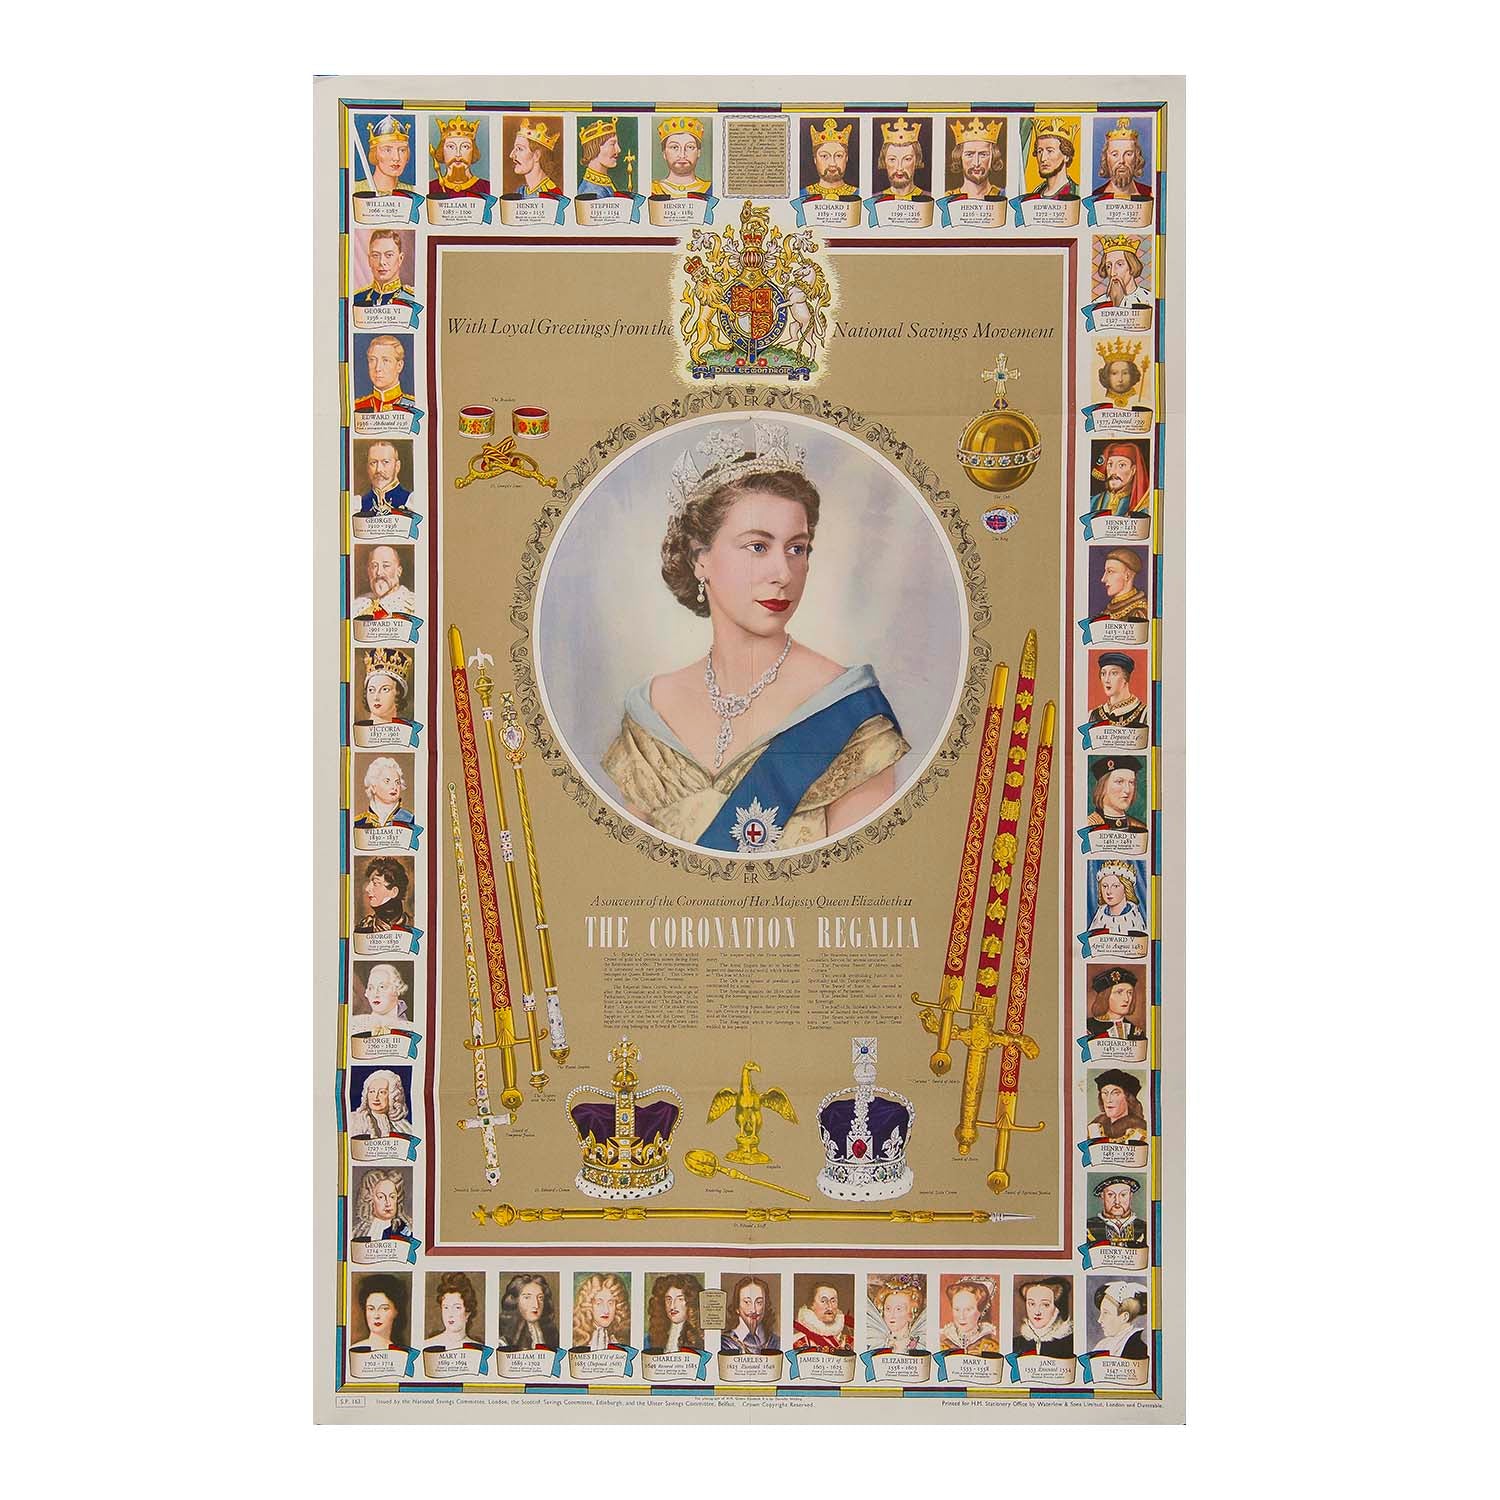 Original National Savings poster celebrating the Coronation of Queen Elizabeth II in 1953. Features a portrait of the queen surrounded by ‘the Coronation Regalia’, within a border of former kings and queens of England.